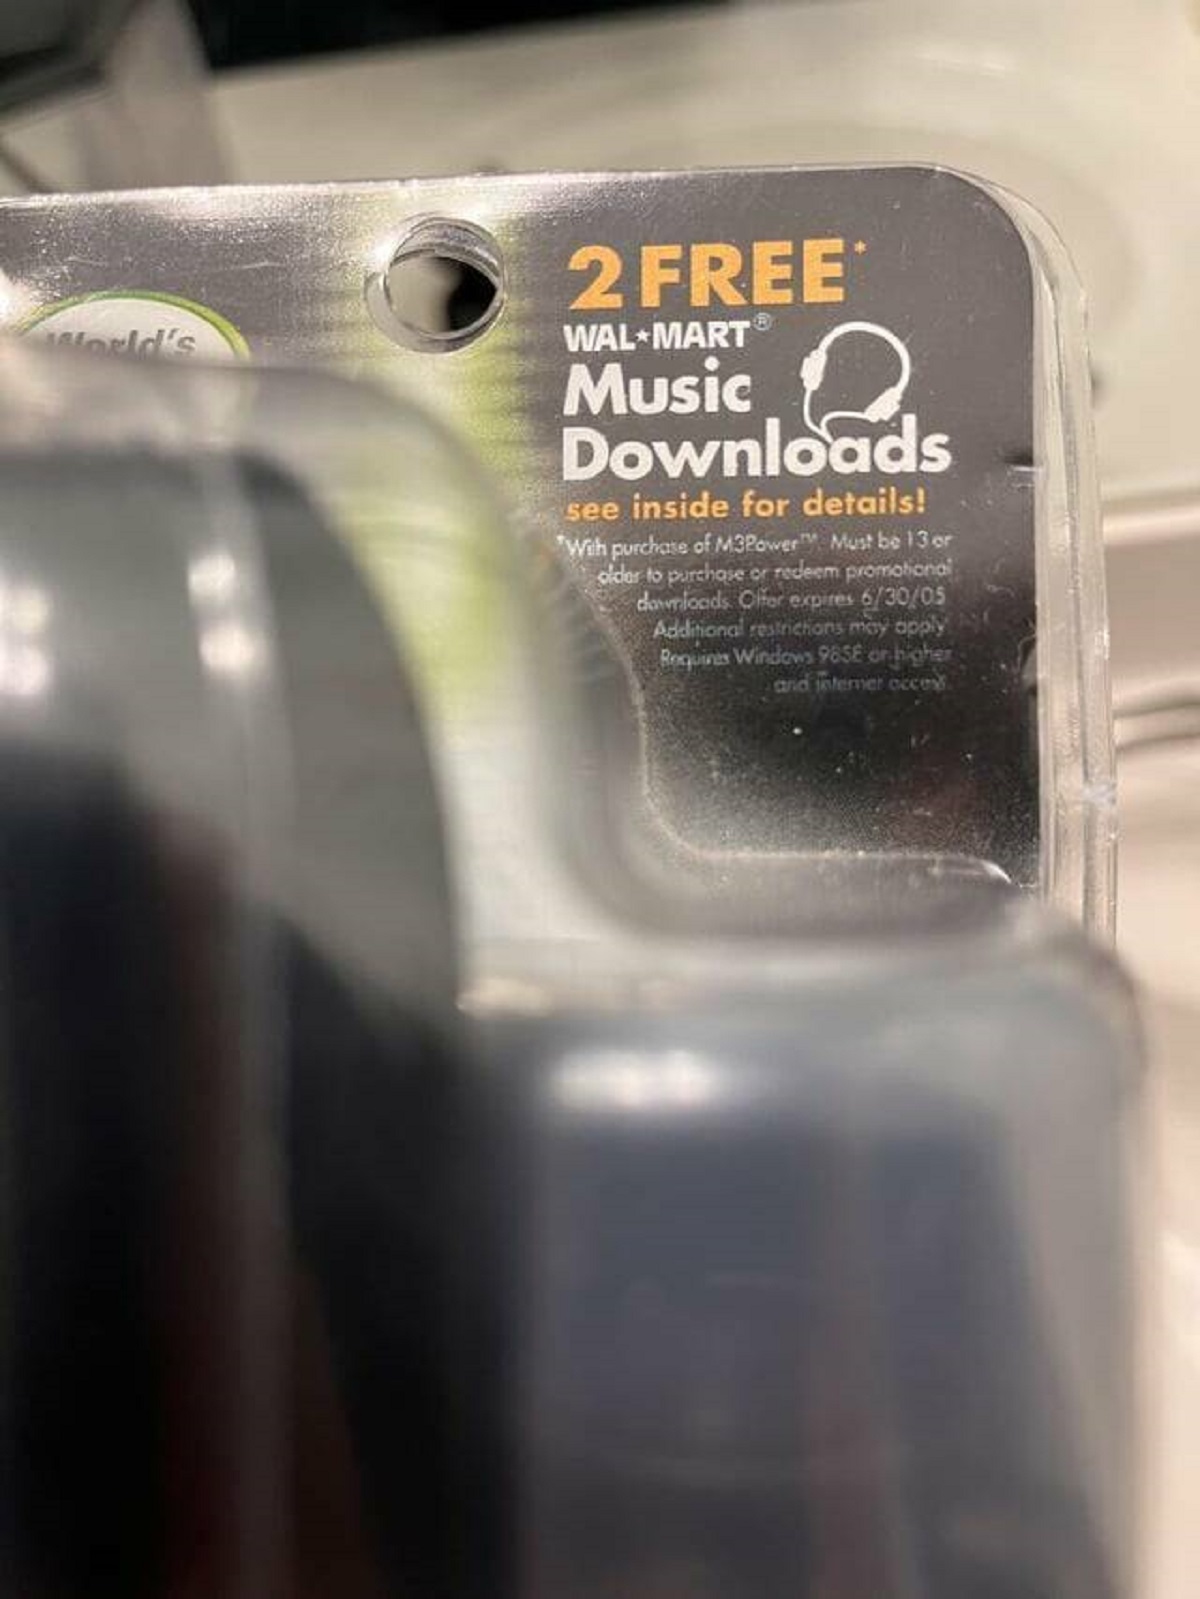 "My grandma gifted me a shaving kit with free music downloads that expired in 2005"